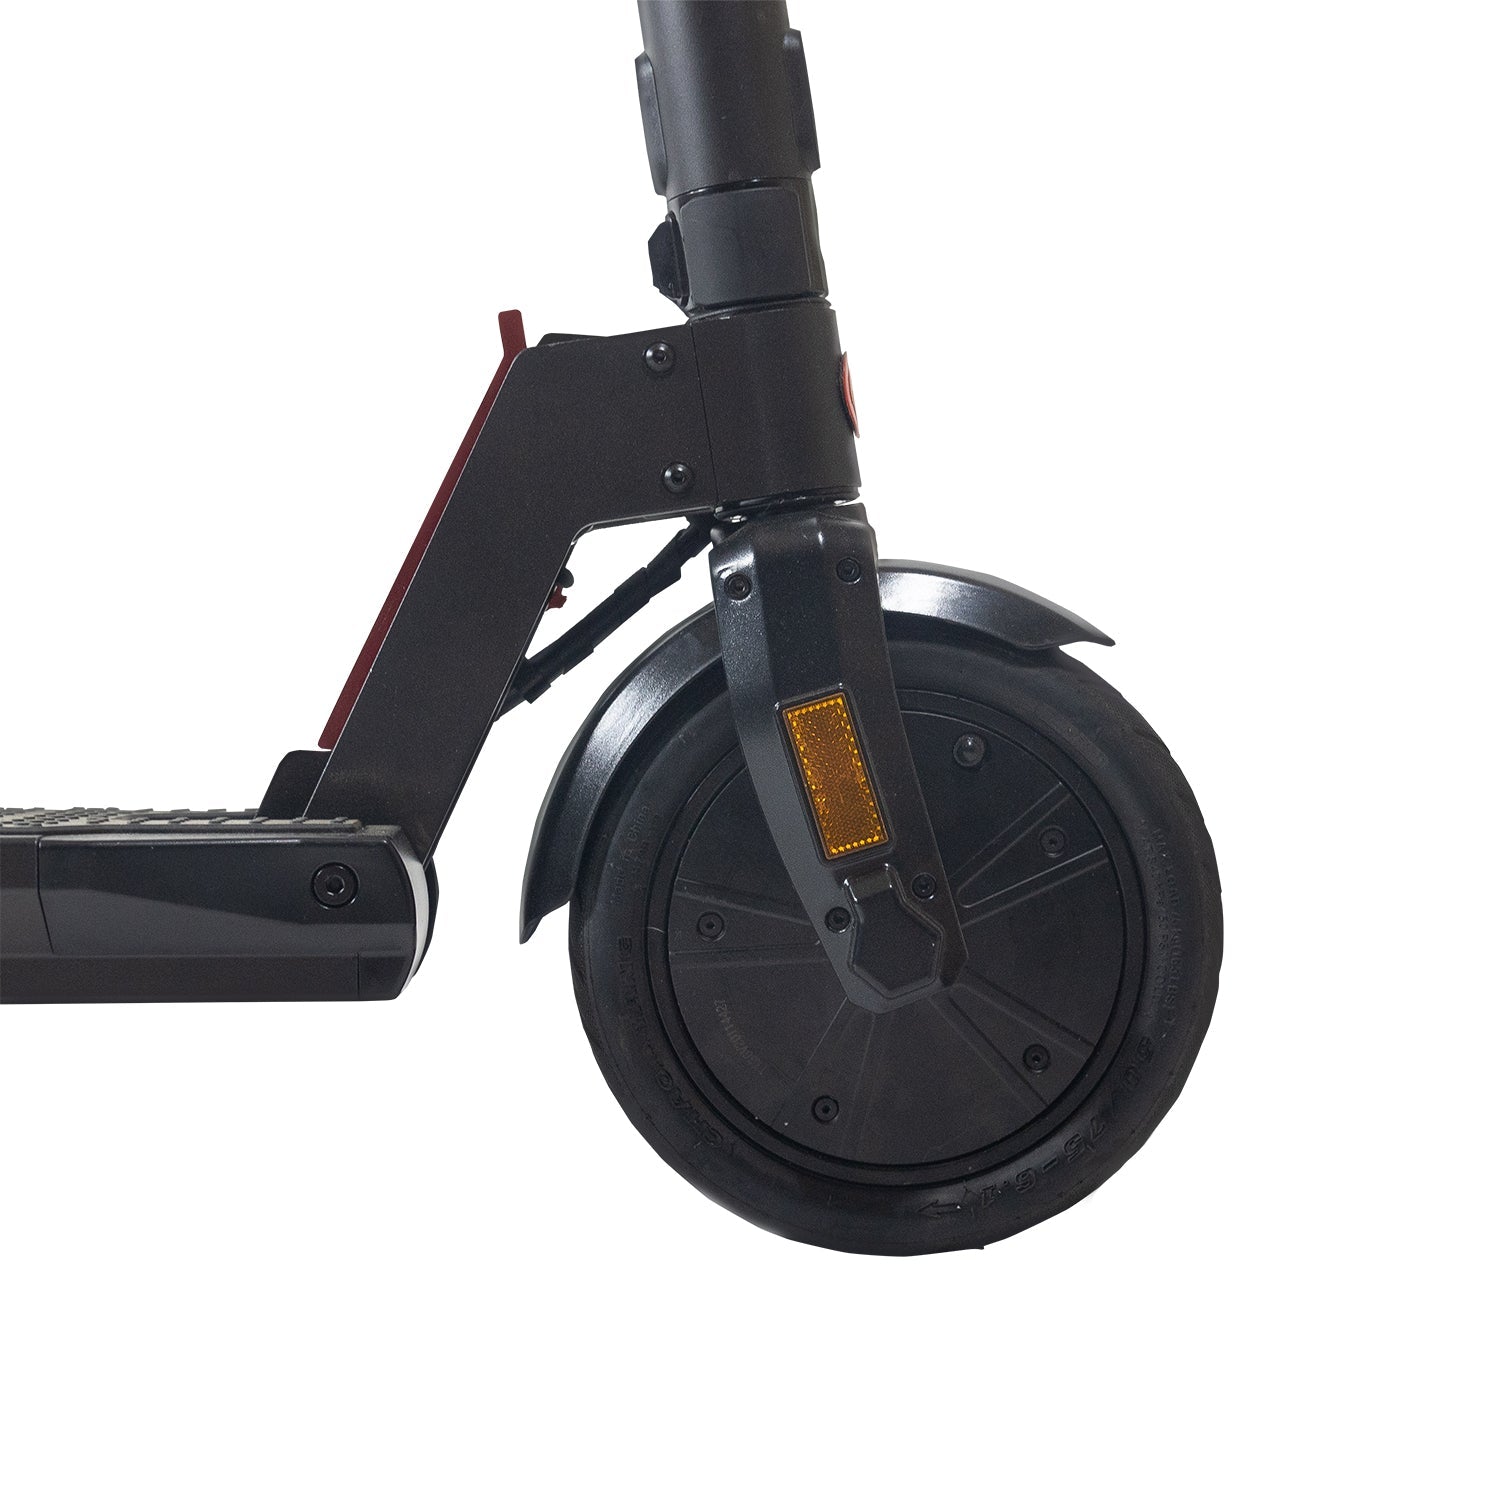 XR Elite Electric Scooter - GOTRAX